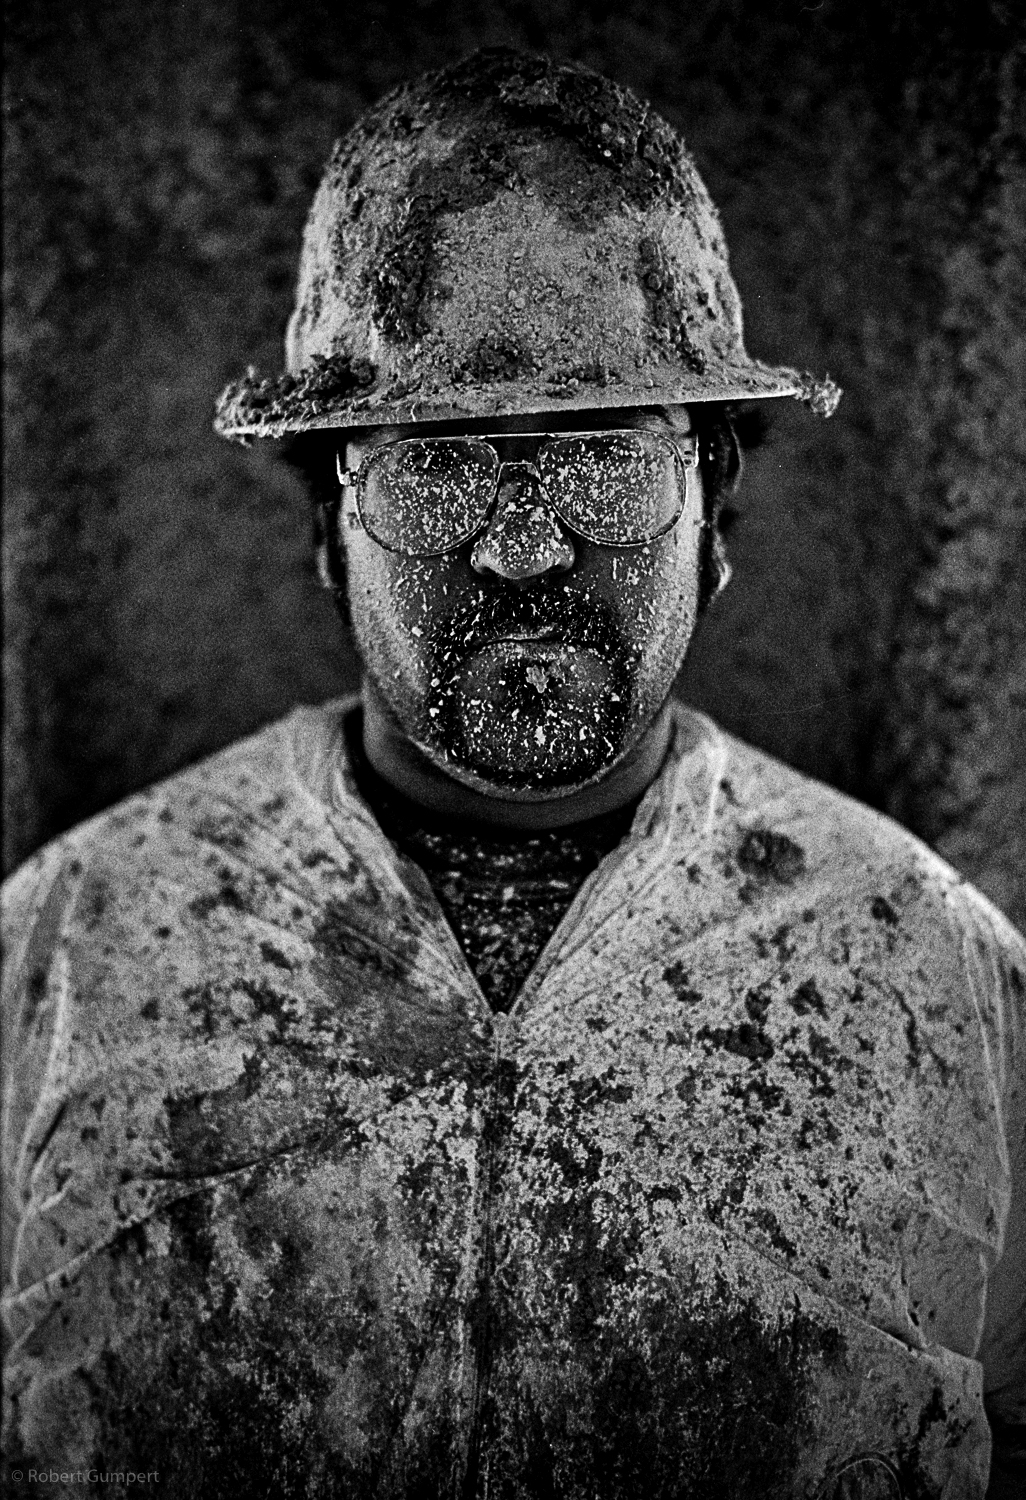  San Francisco, CA.  2000.  Apprentice contruction worker covered in insulation material. 